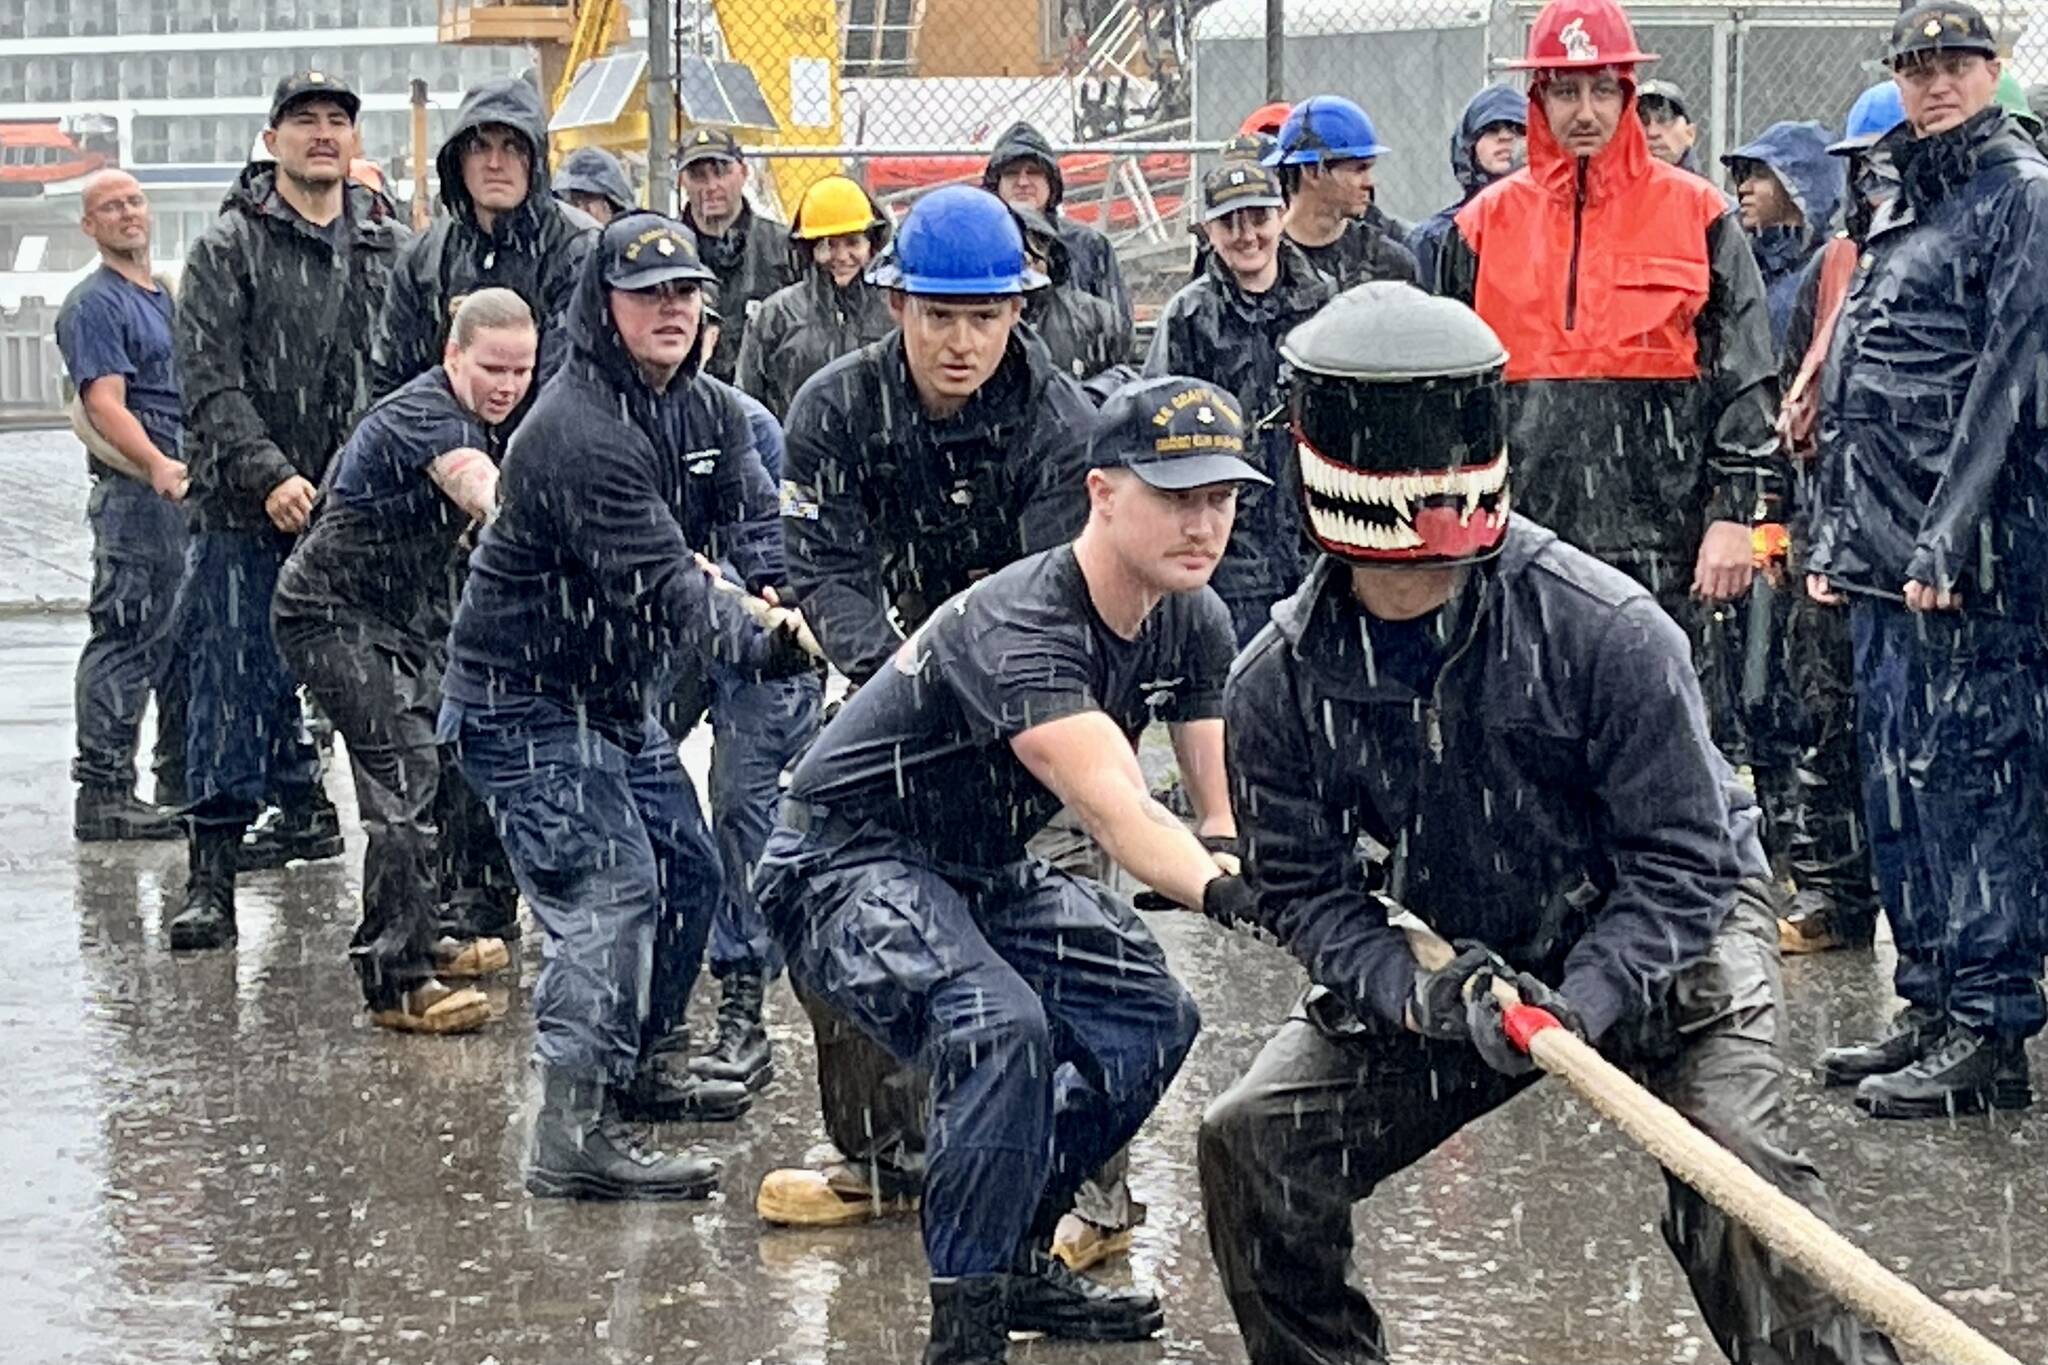 Team Elm faces off against Team Cypress in a battle of tug of war during the Coast Guard’s annual Buoy Tender Olympics on Wednesday at the Coast Guard Station Juneau. (Jonson Kuhn / Juneau Empire)